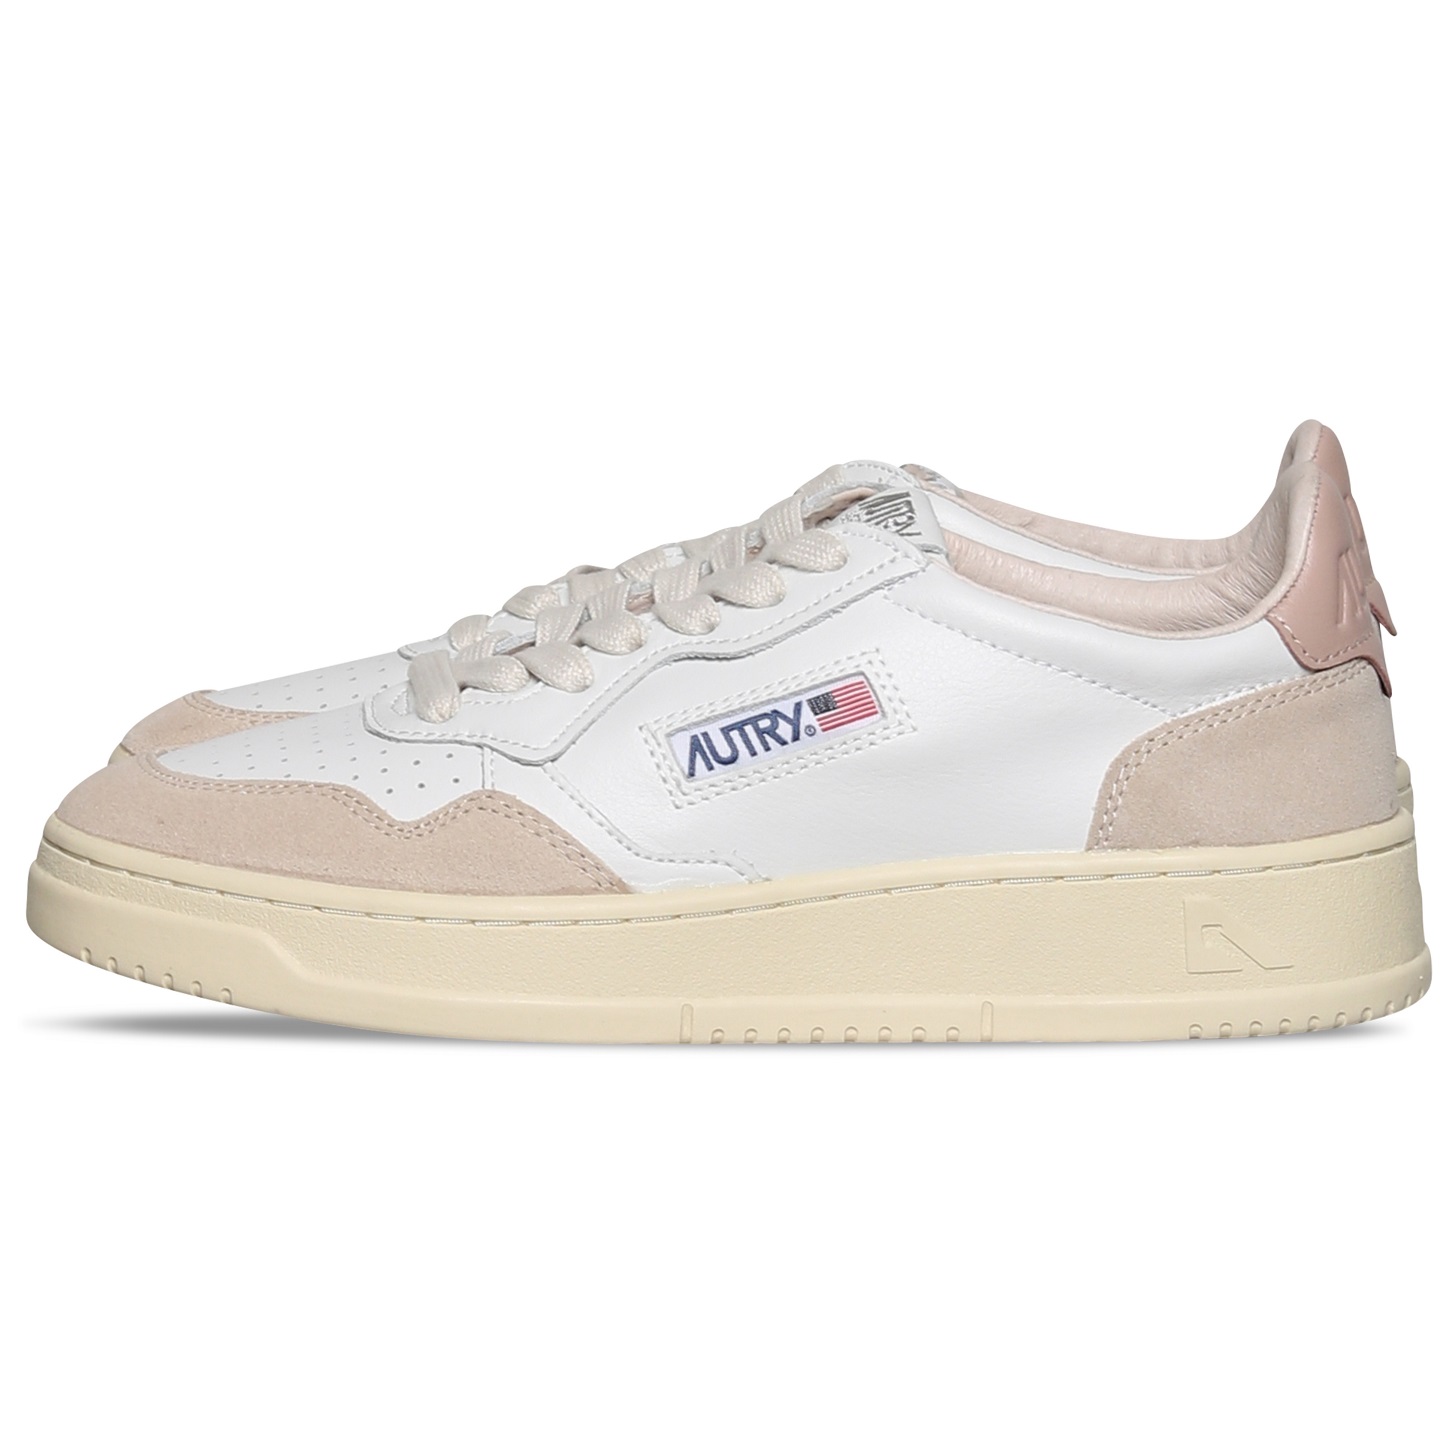 Autry Action Shoes Low Sneaker White/Suede/Pow